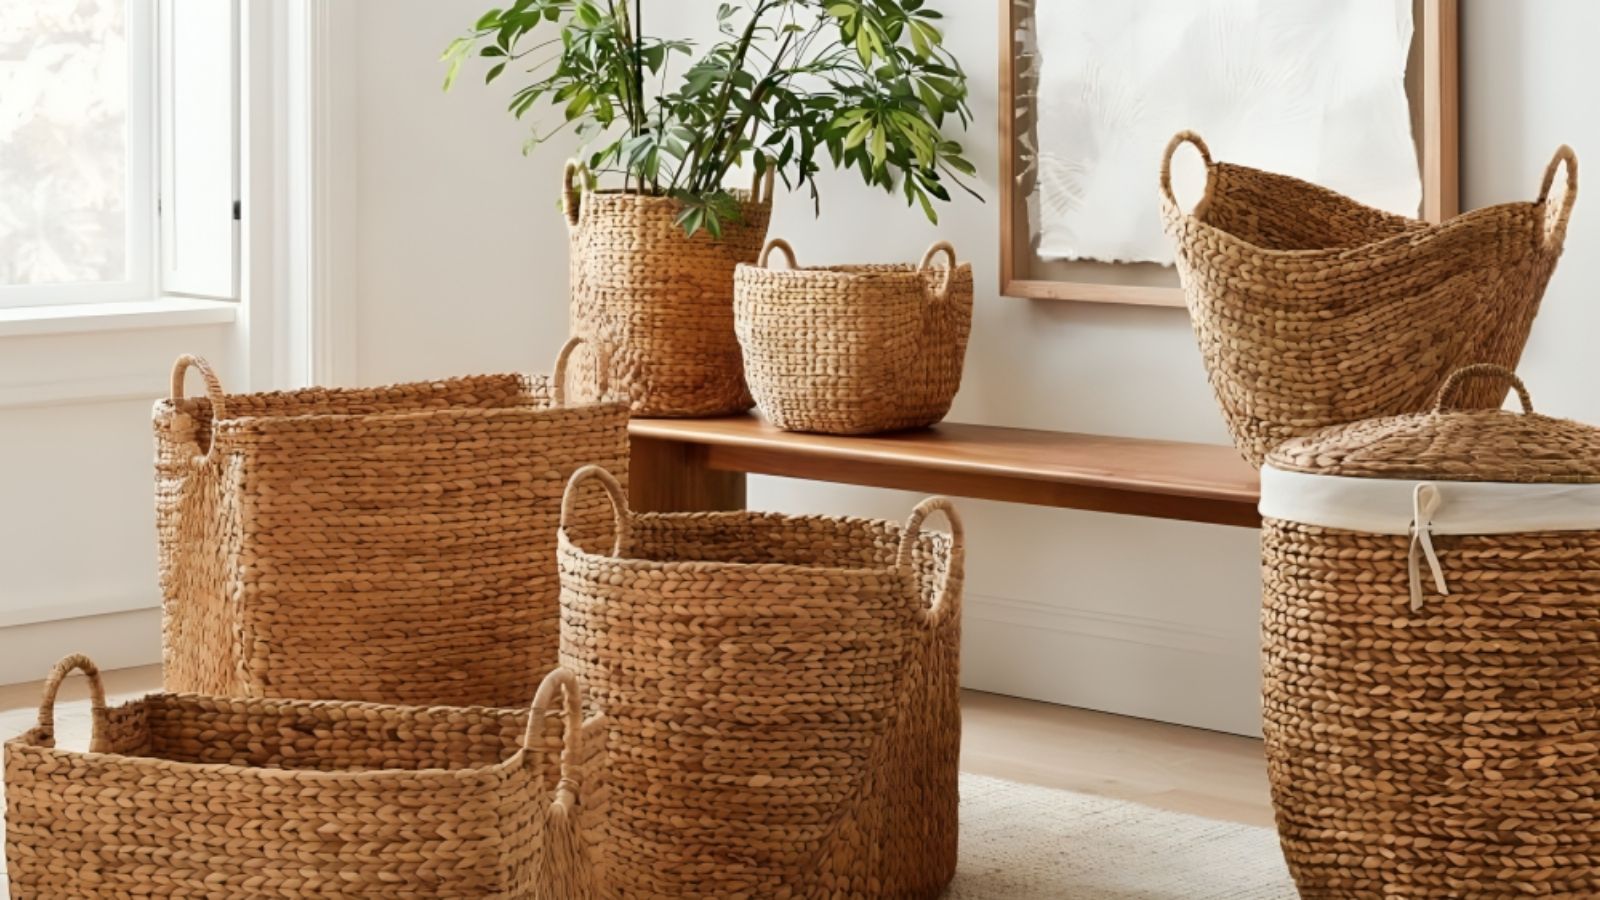 Wholesale fish basket to Organize and Tidy Up Your Home 